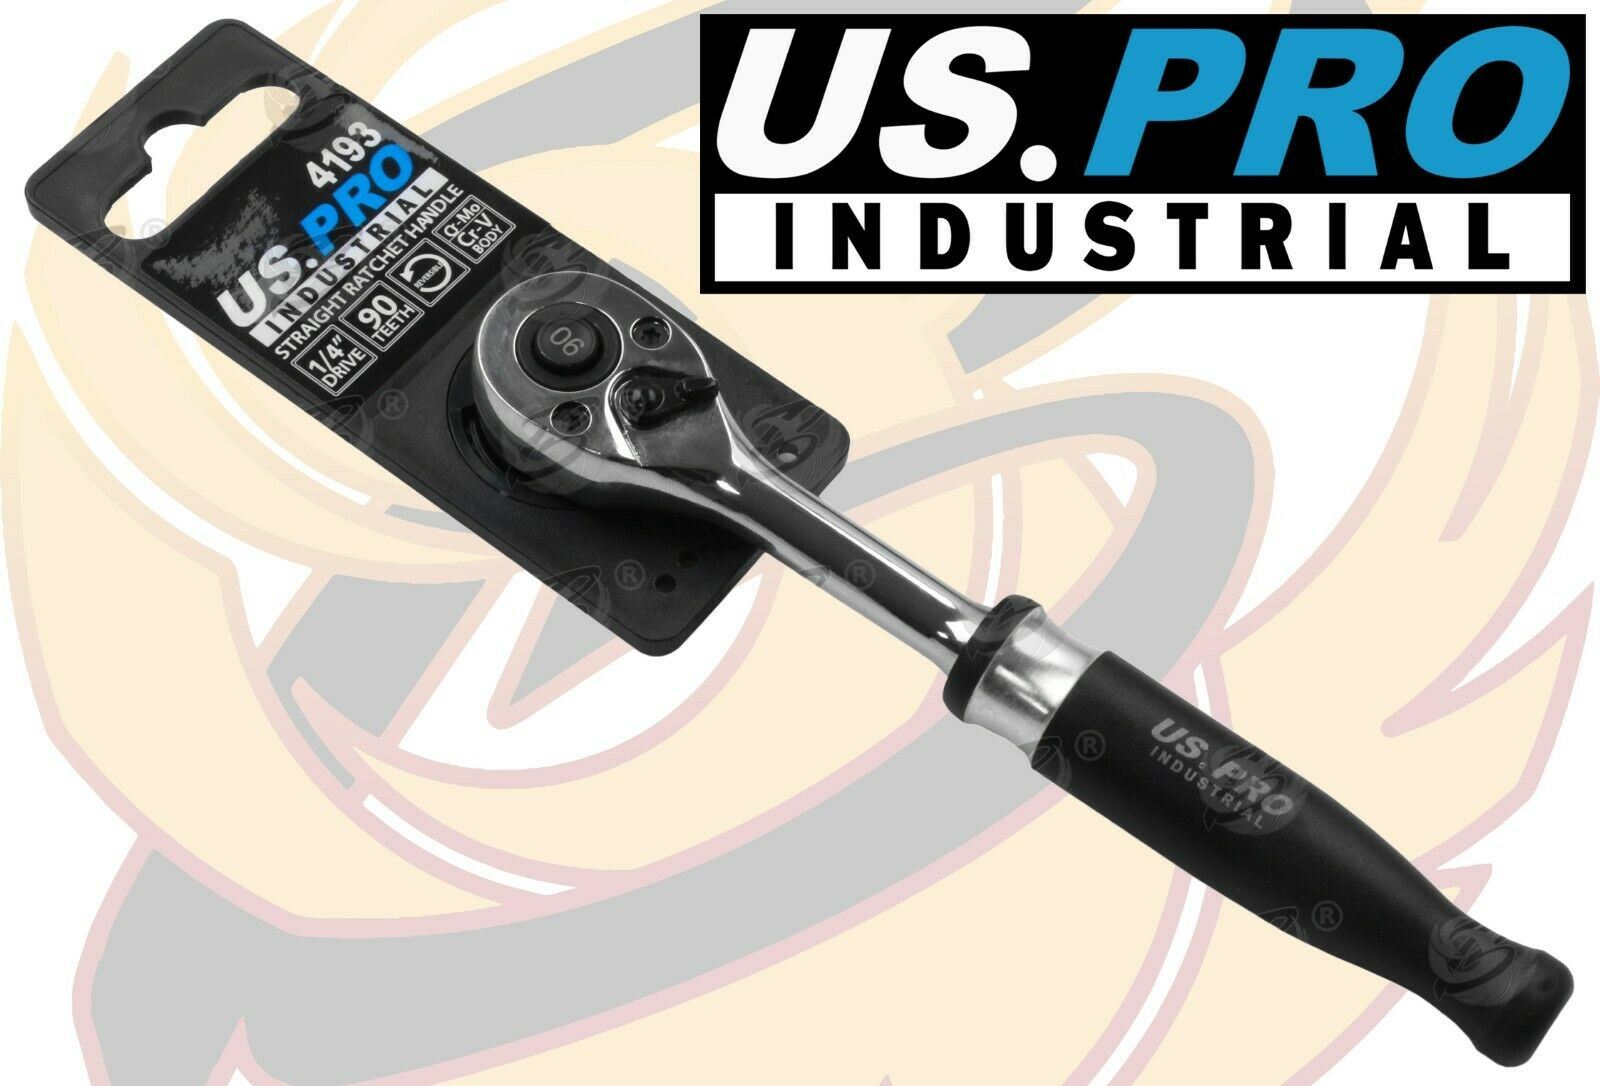 US PRO INDUSTRIAL 1/4" DRIVE 90 TOOTH RATCHET HANDLE